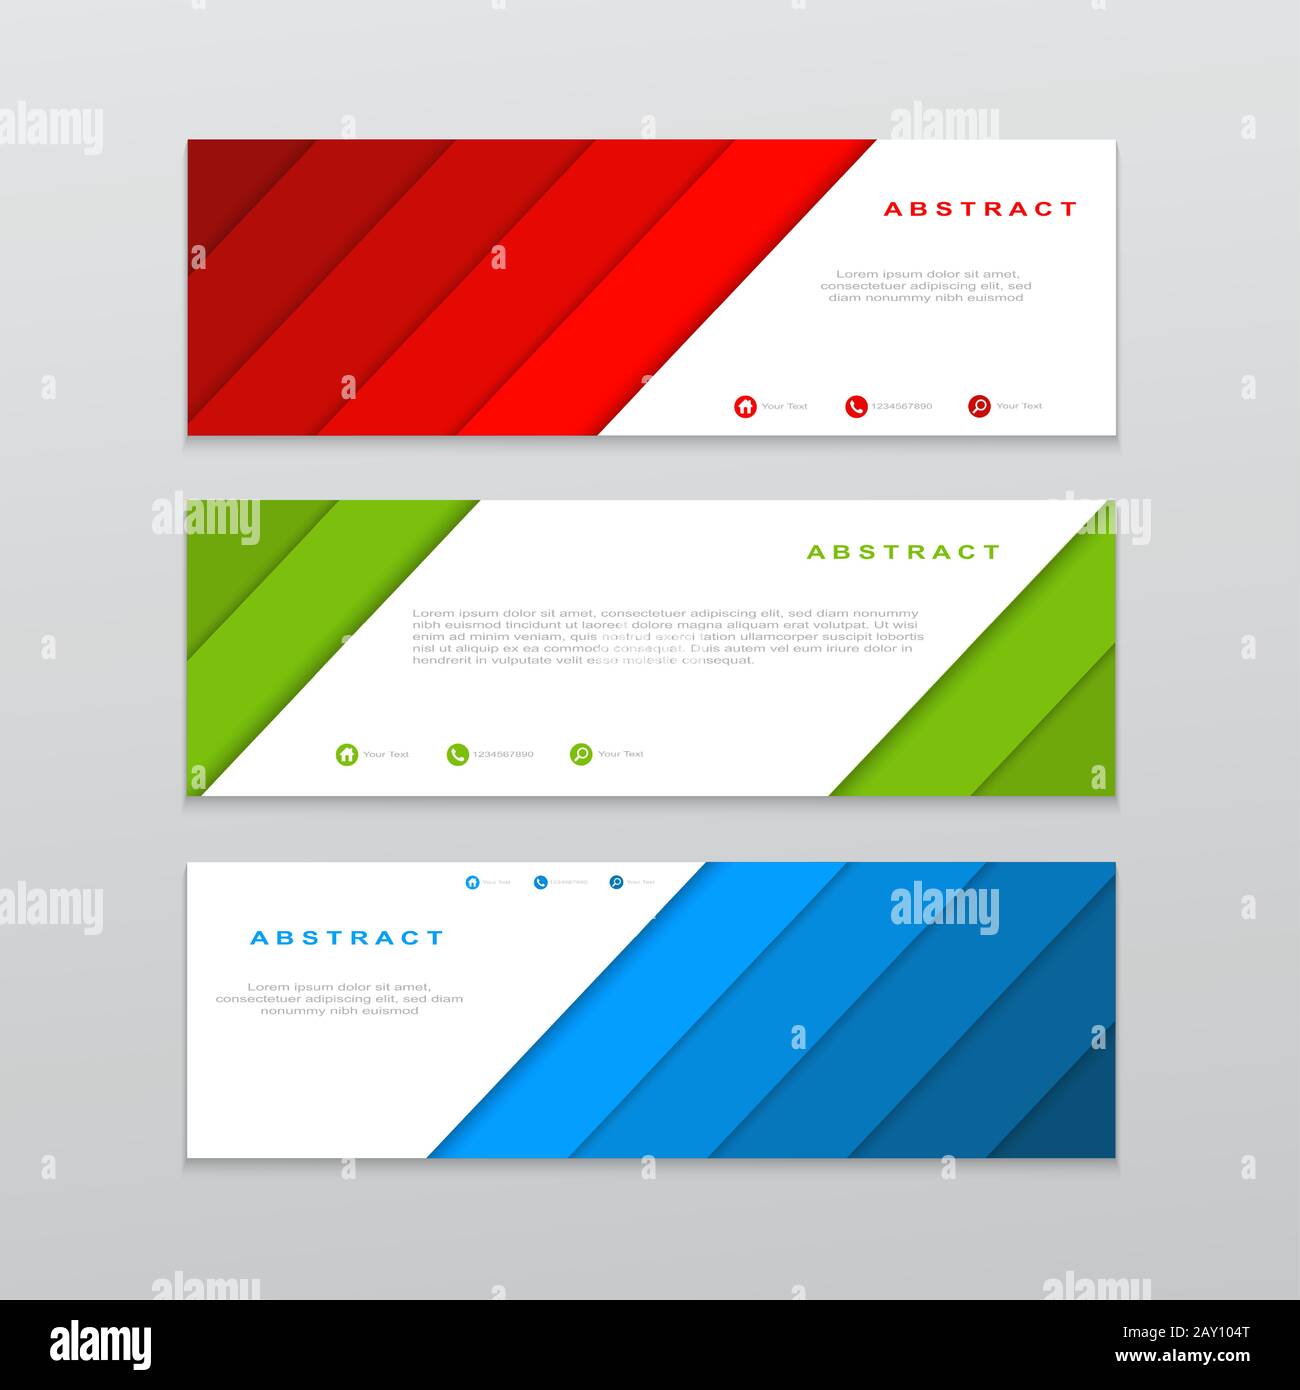 3d vector abstract banner template. Horizontal web banner, modern dynamic design. Creative design of papercut style red, green, blue colored banners Stock Vector